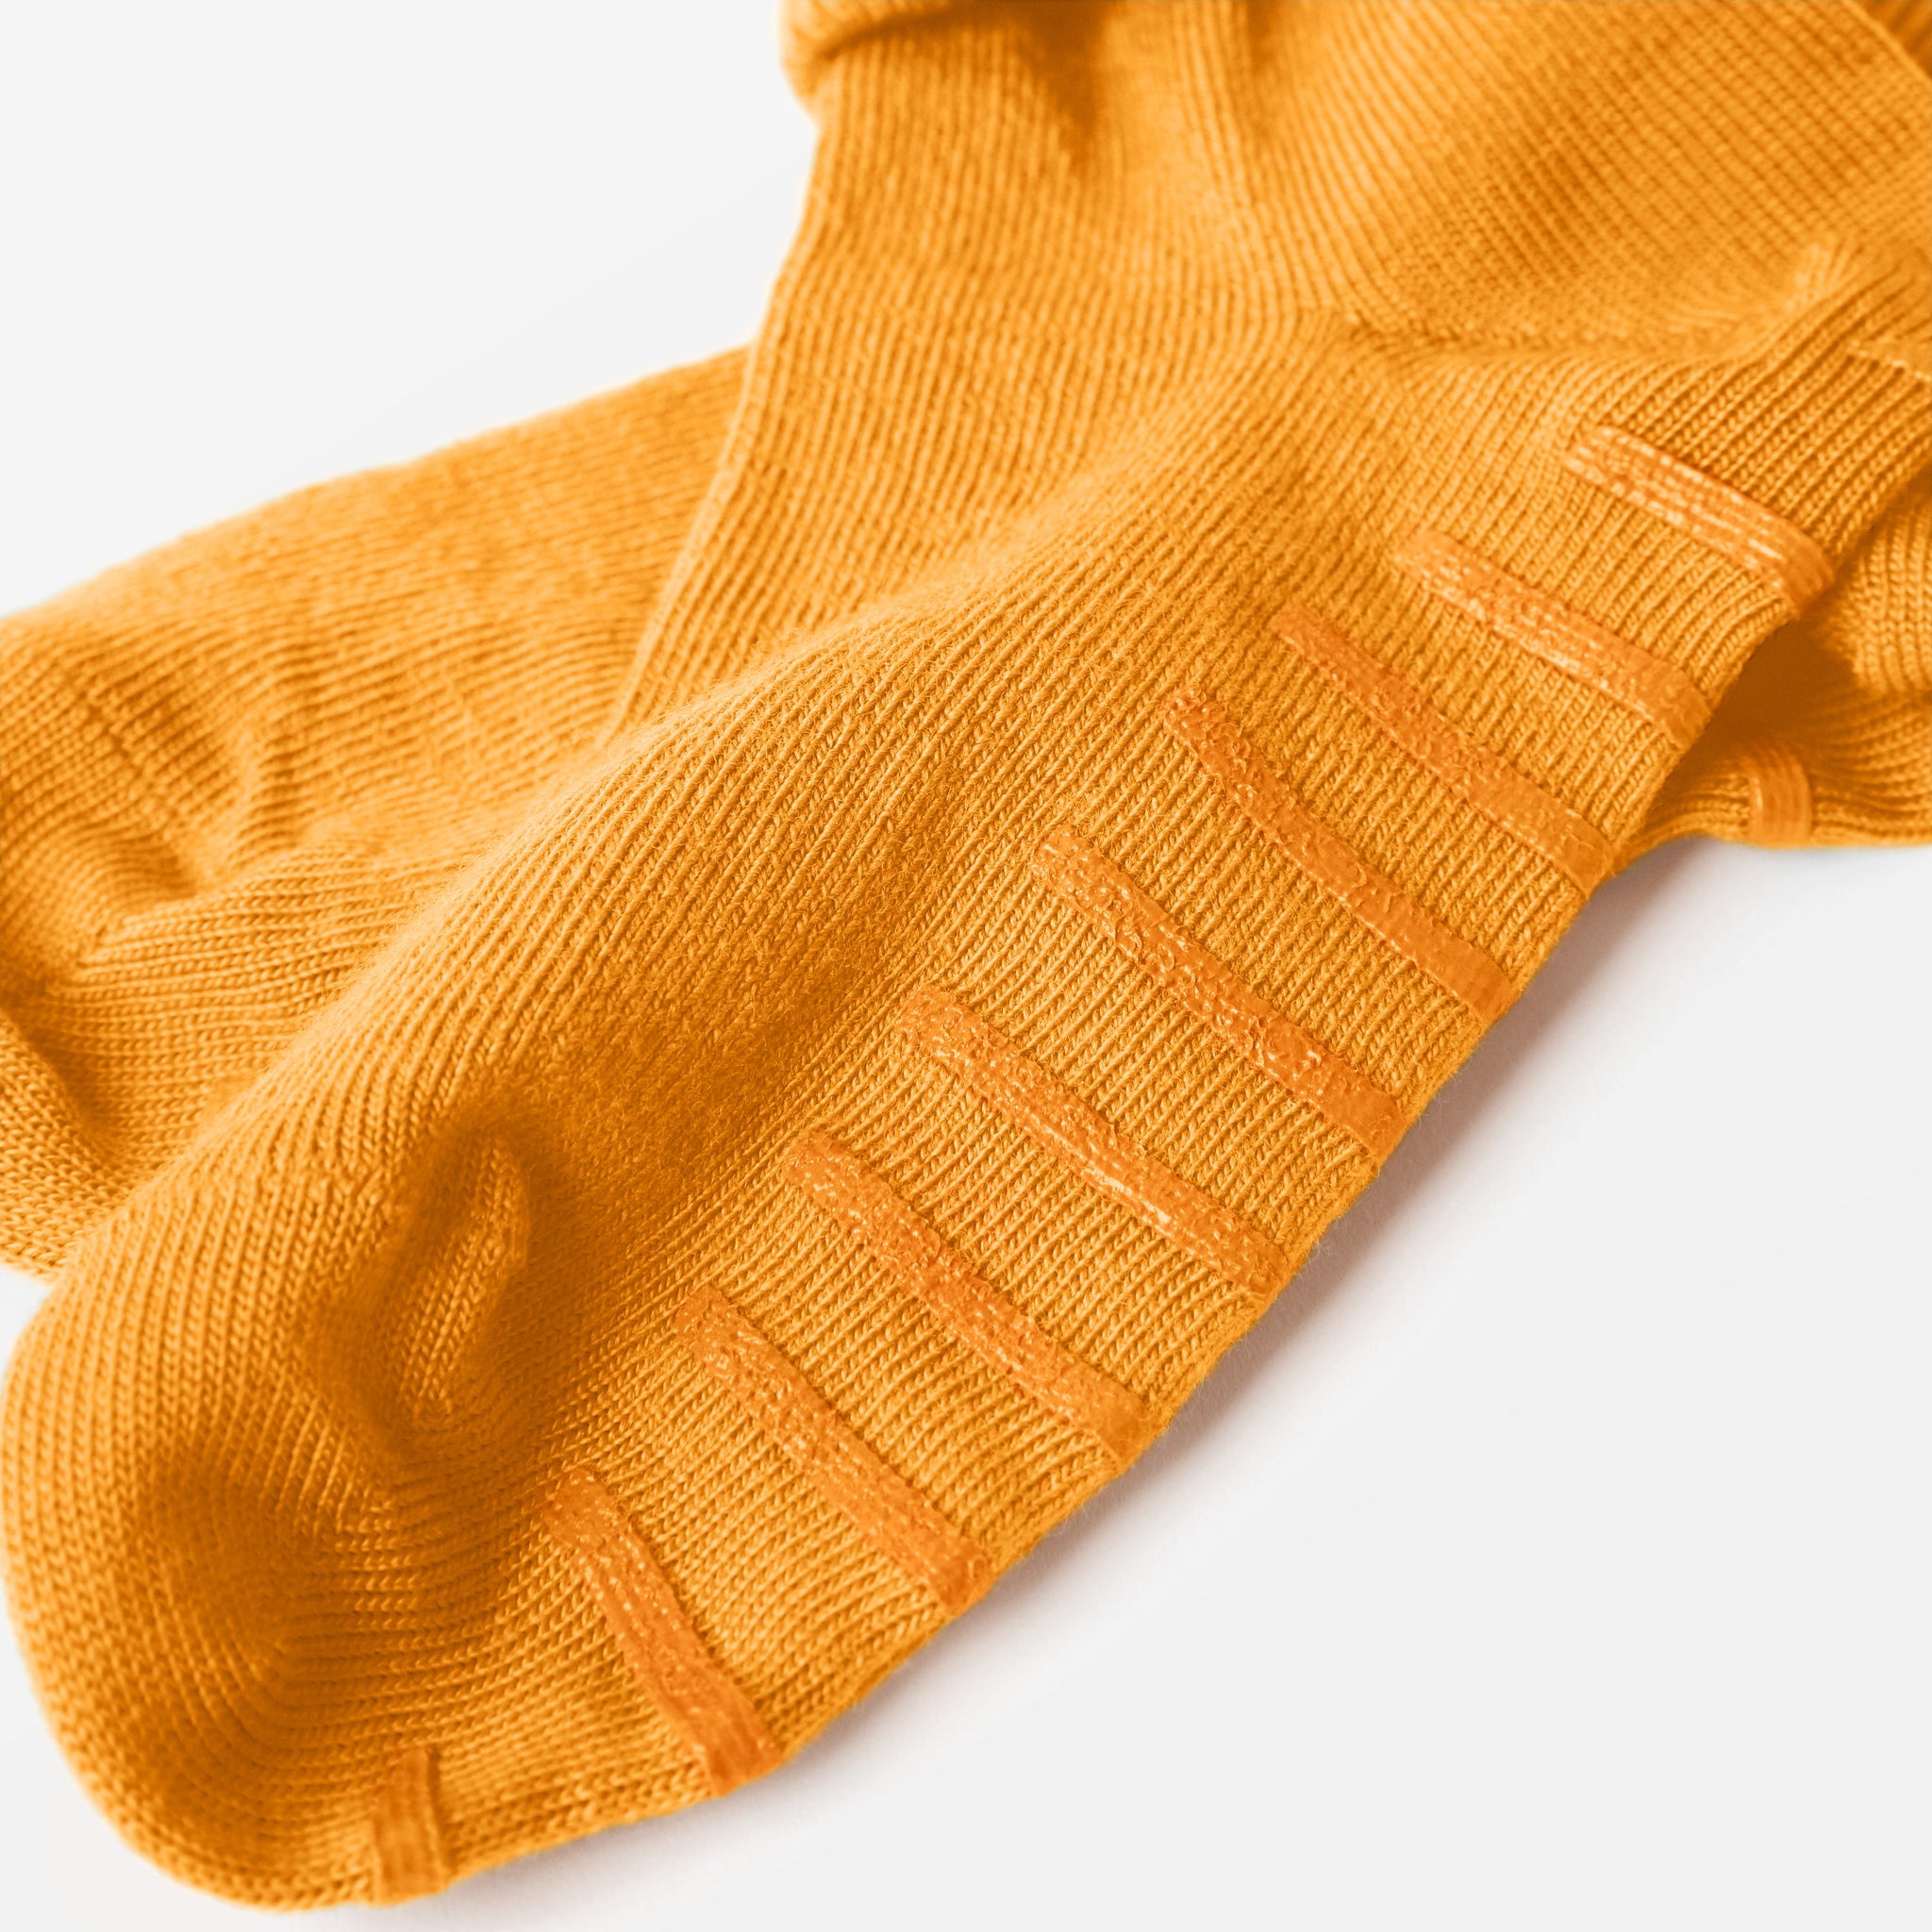 Yellow Merino Wool Baby Socks from the Polarn O. Pyret kidswear collection. Ethically produced kids outerwear.